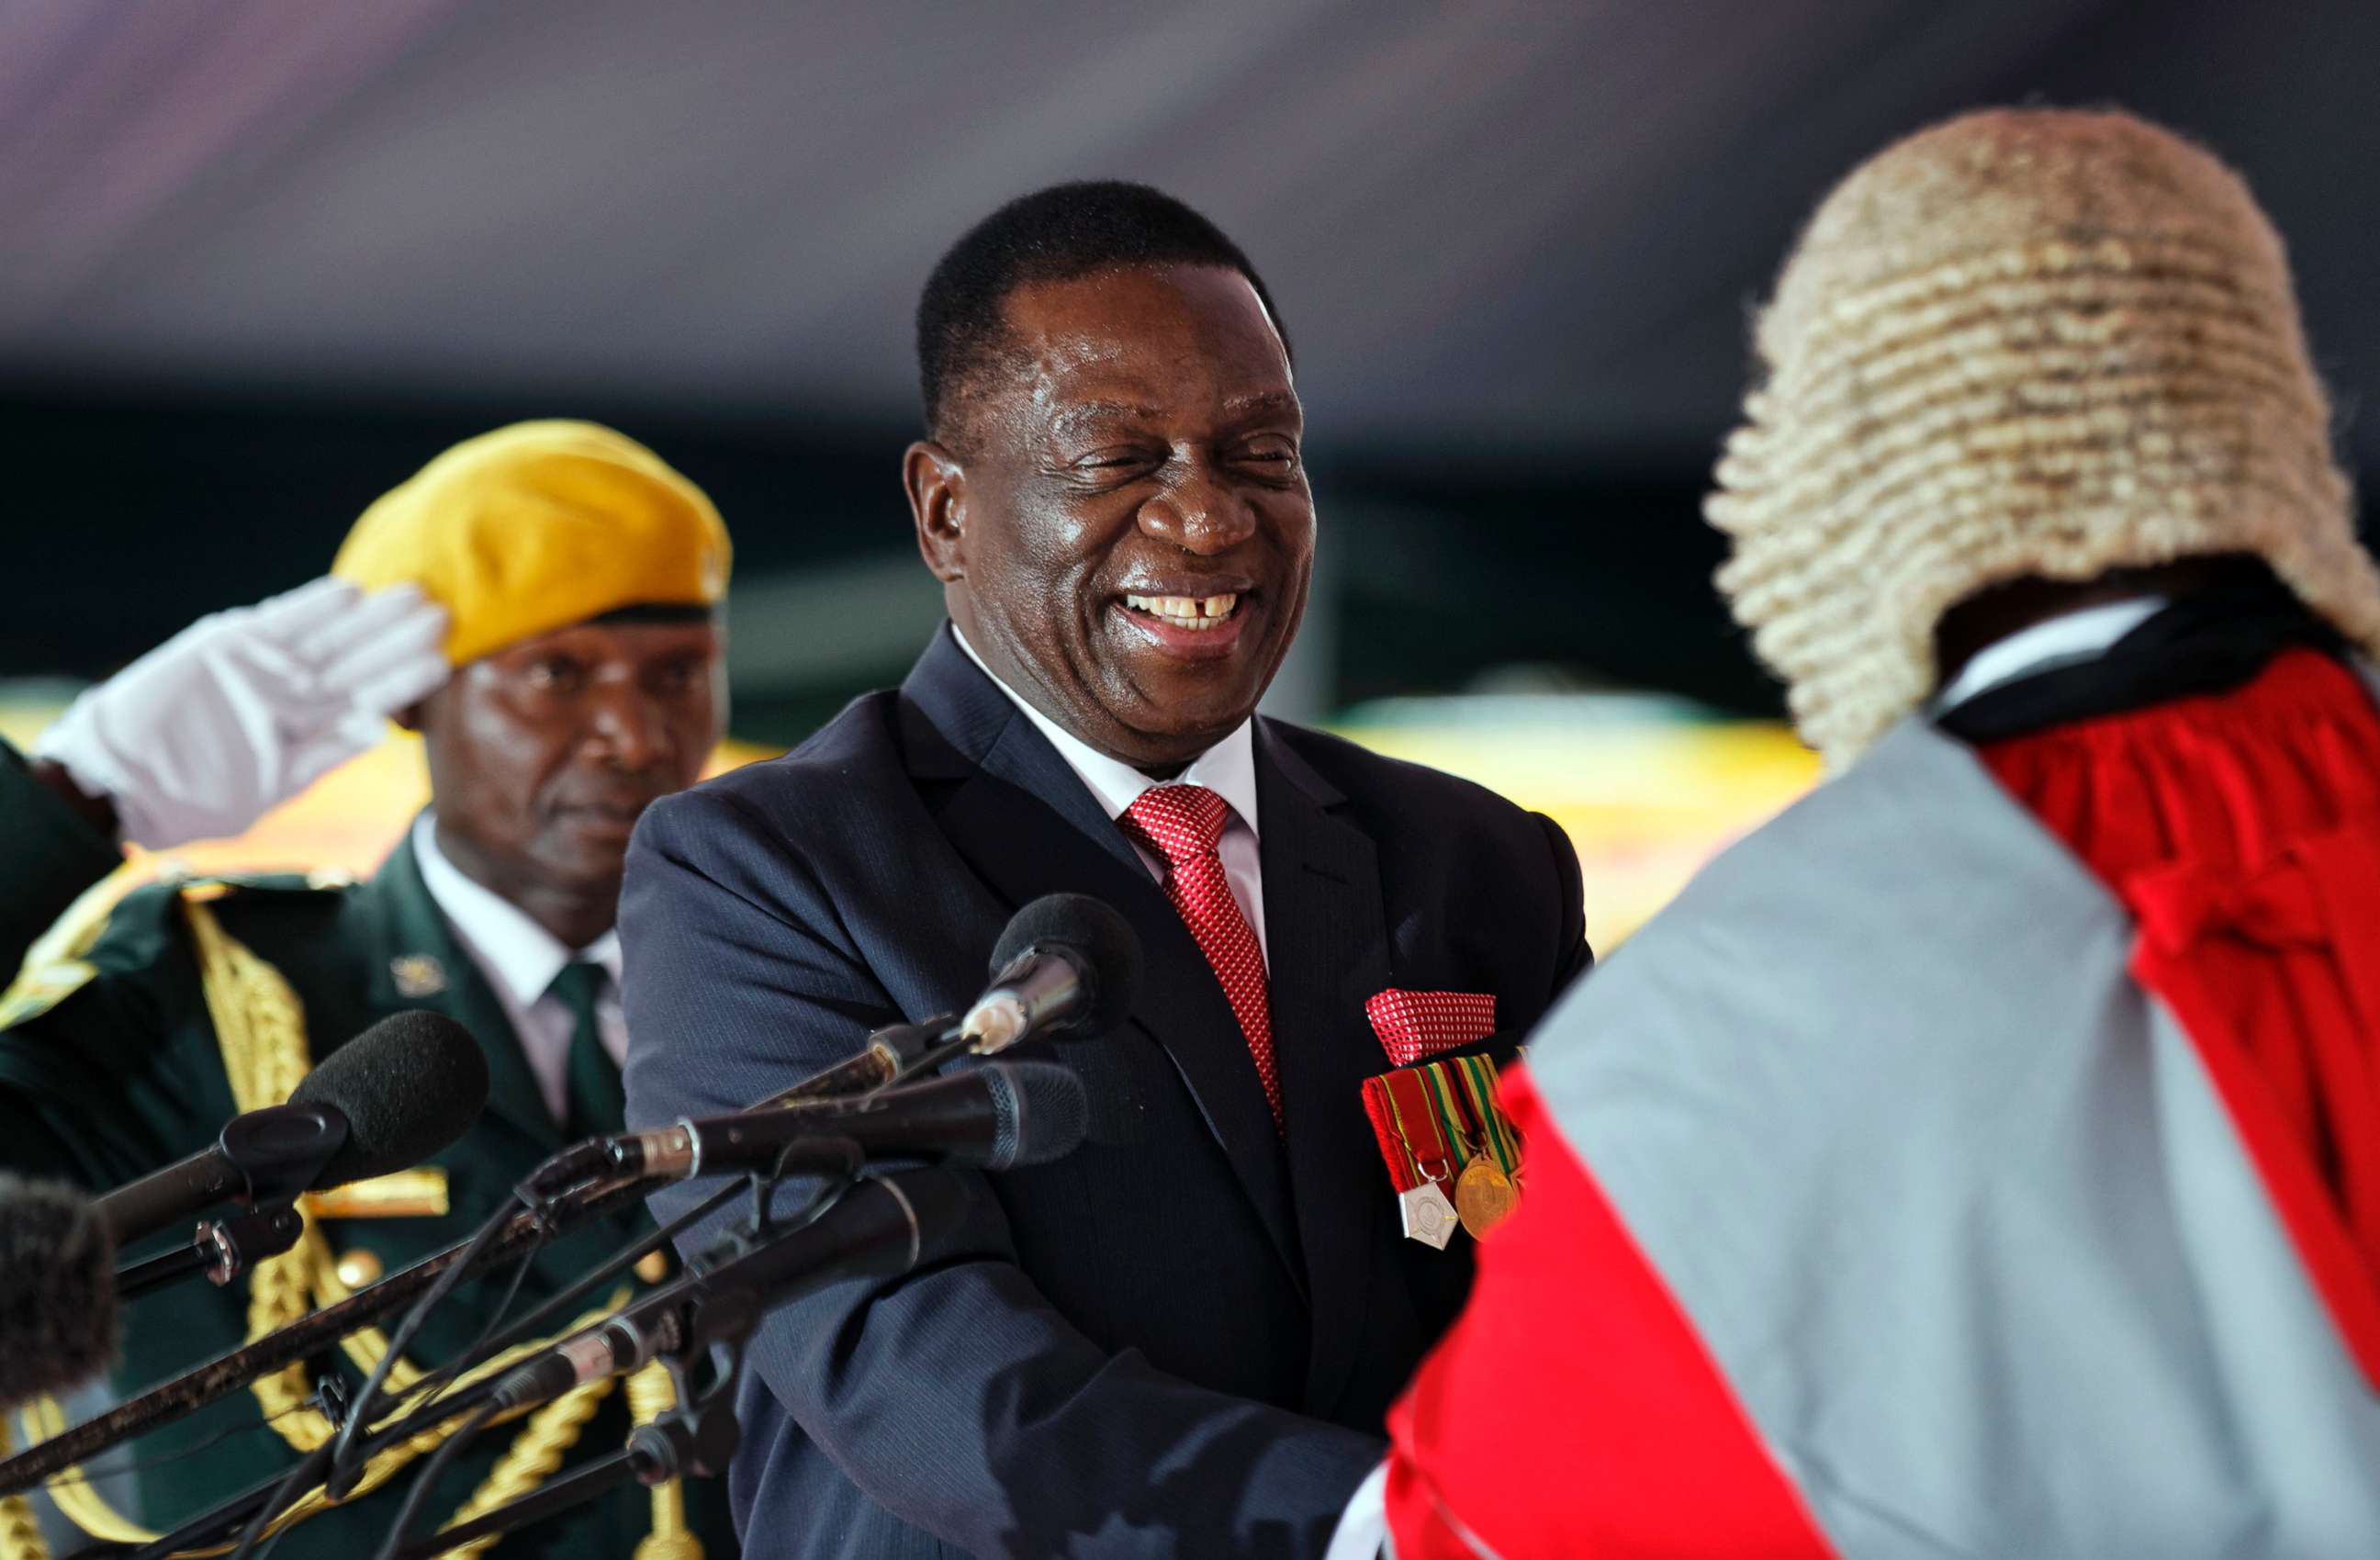 PHOTO: Emmerson Mnangagwa, center, is sworn in as President at the presidential inauguration ceremony in the capital Harare, Zimbabwe, Nov. 24, 2017 